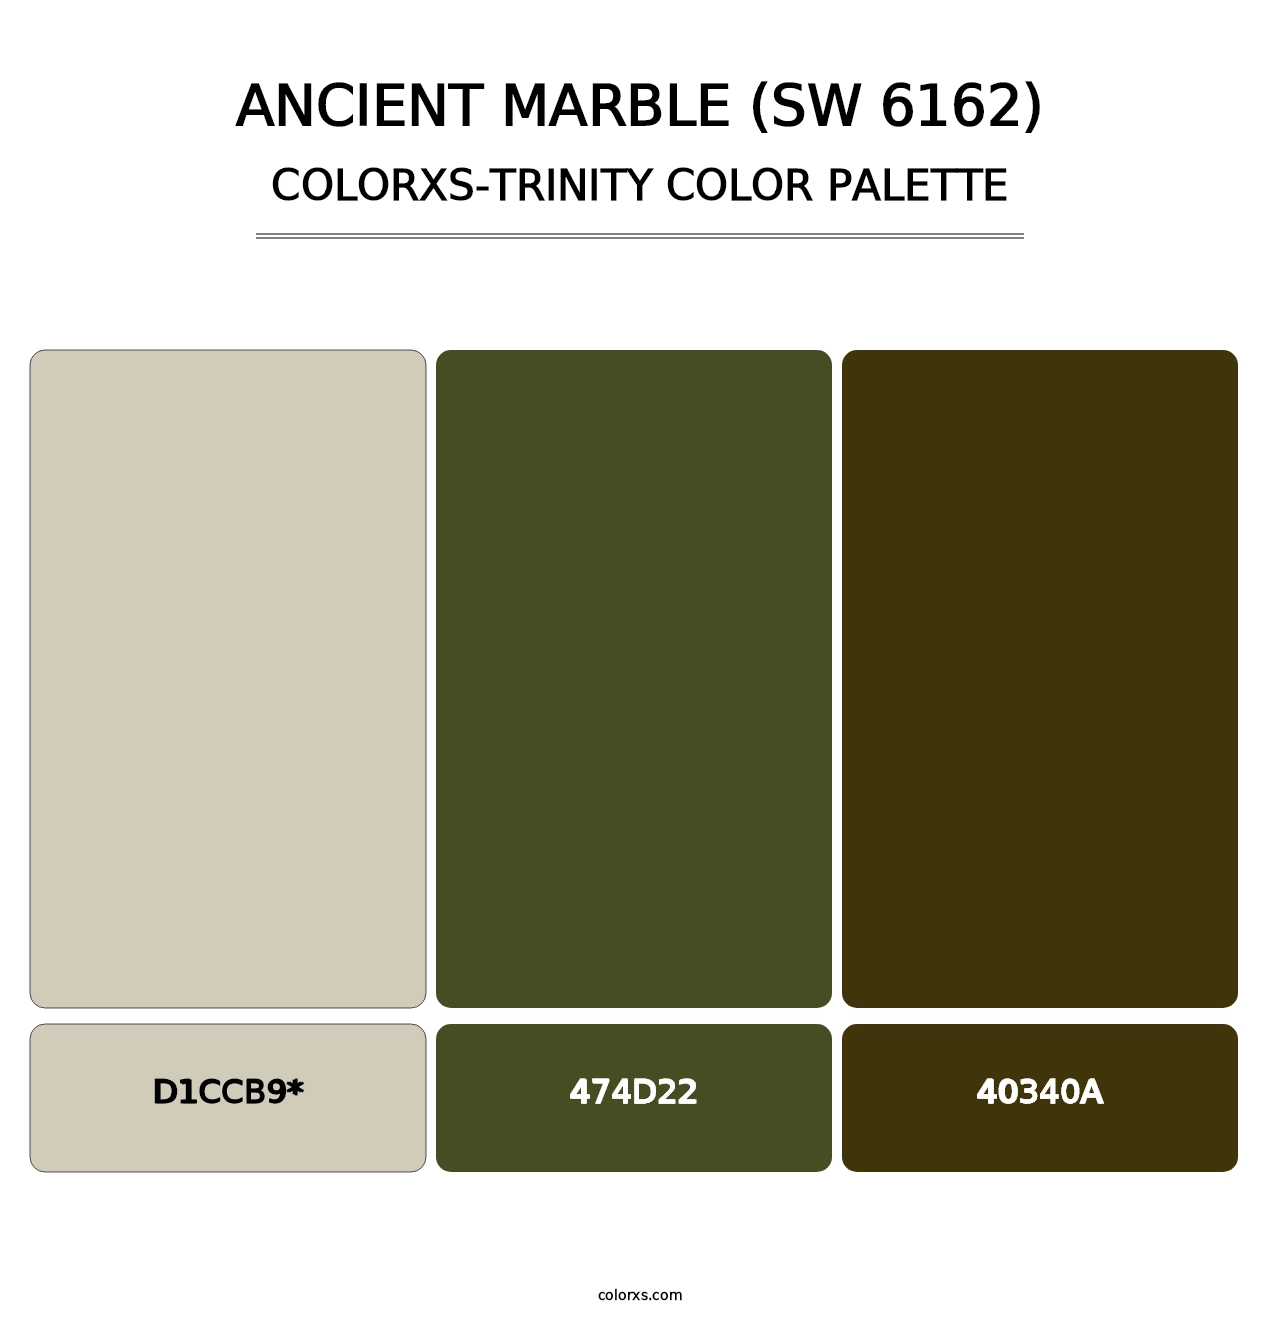 Ancient Marble (SW 6162) - Colorxs Trinity Palette